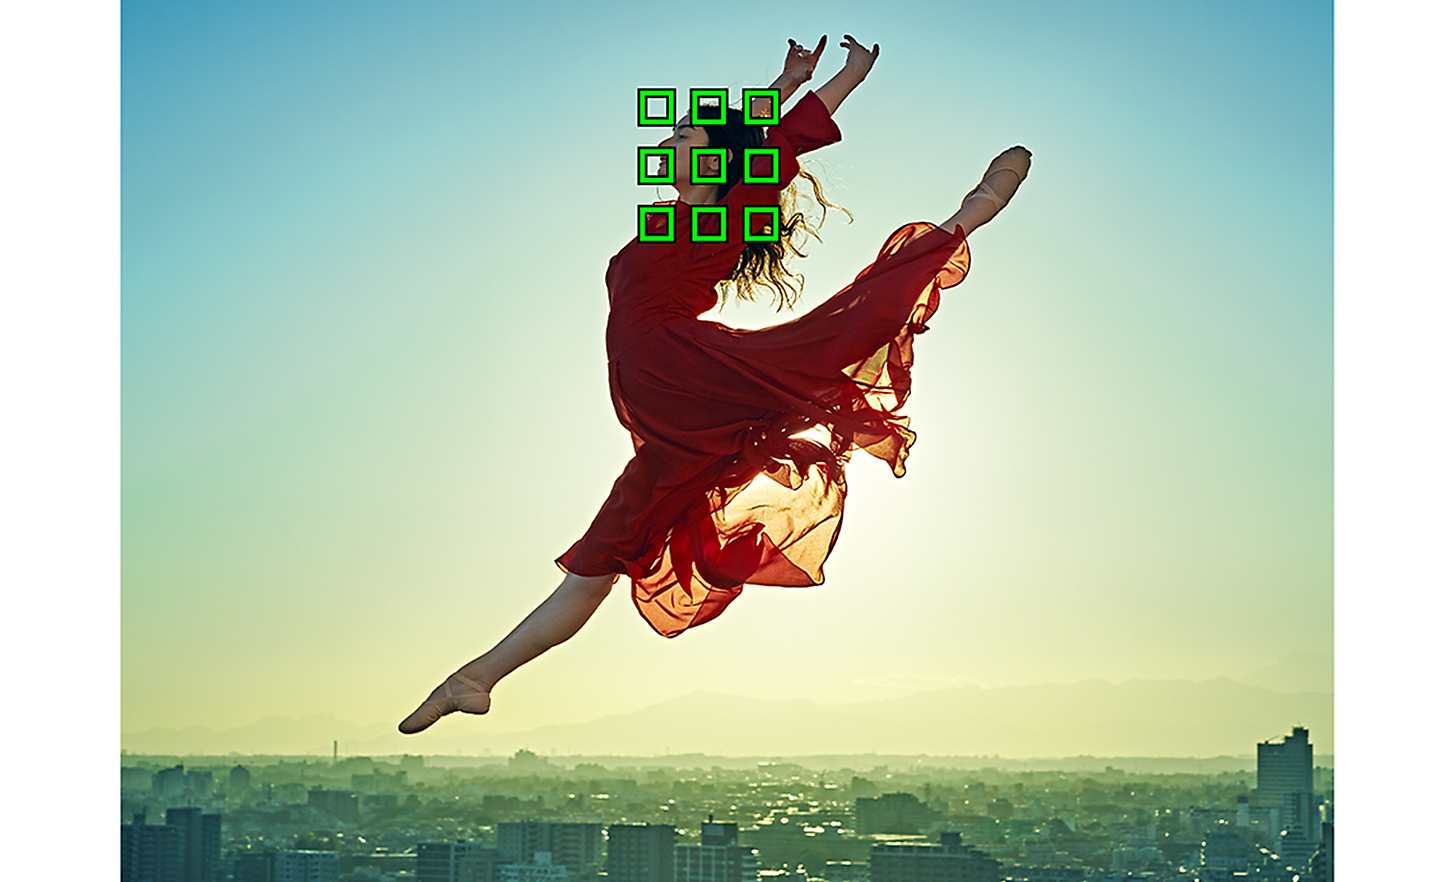 A leaping dancer in a red dress against a vast cityscape - a cluster of 9 green squares shows AI subject detection